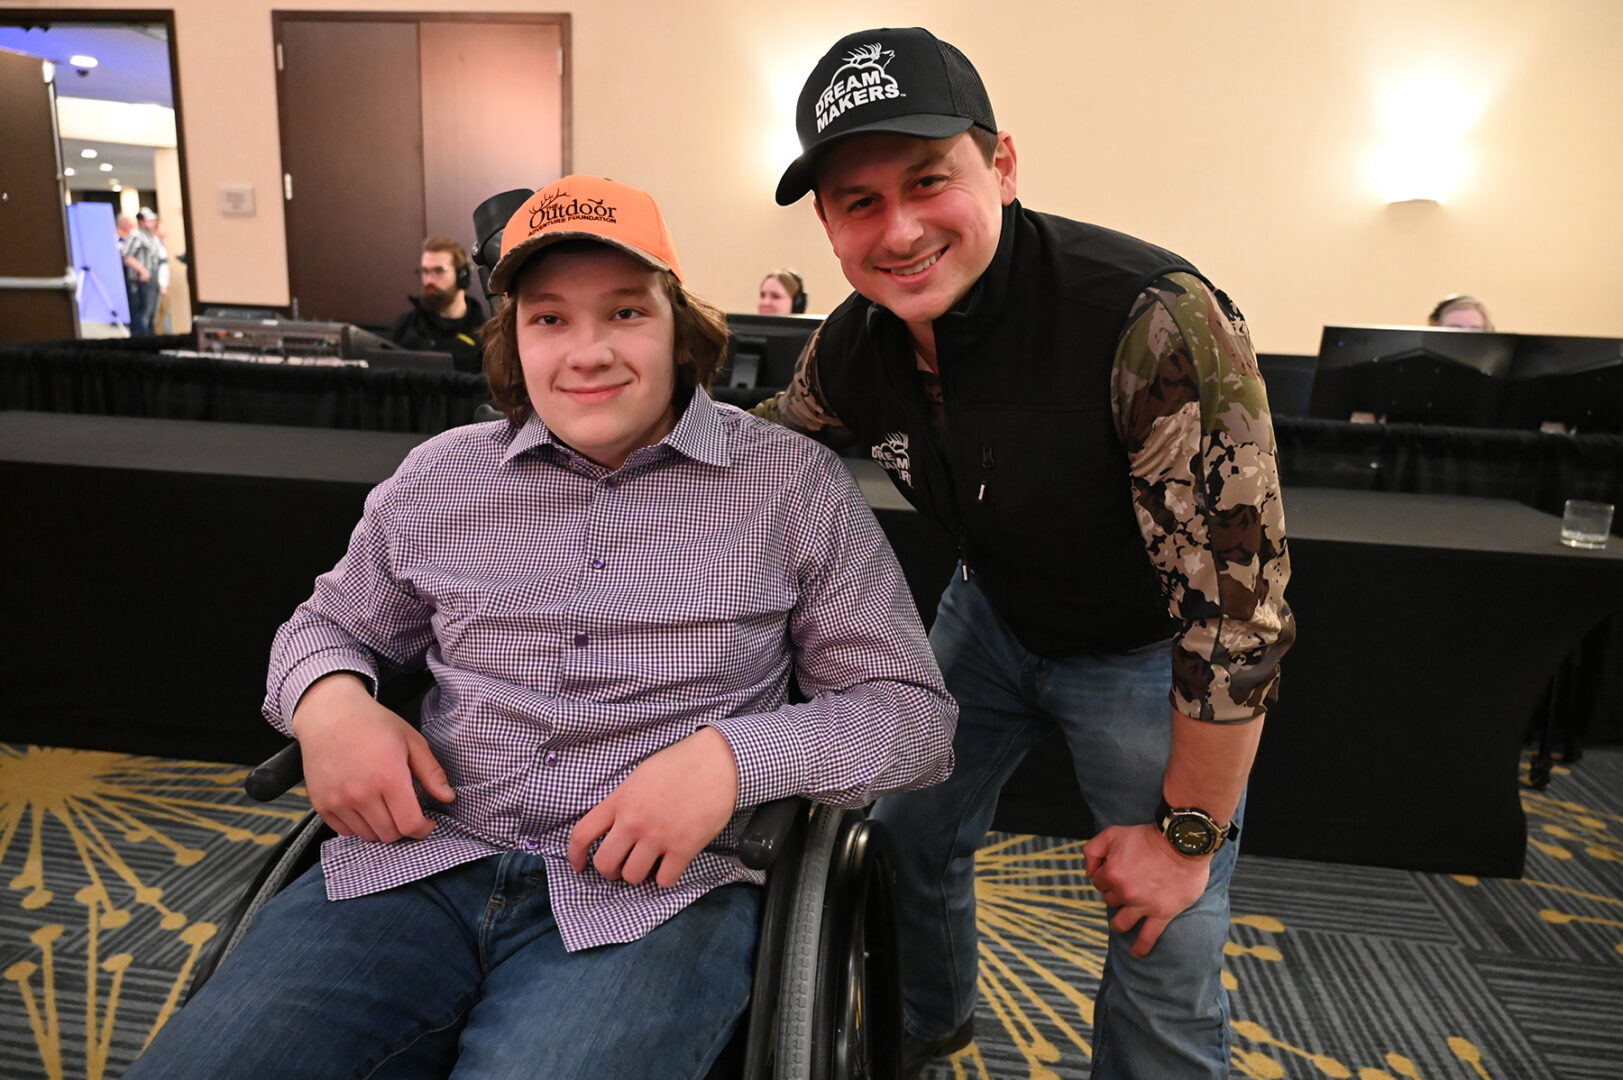 A man and boy in a wheelchair posing for the camera.